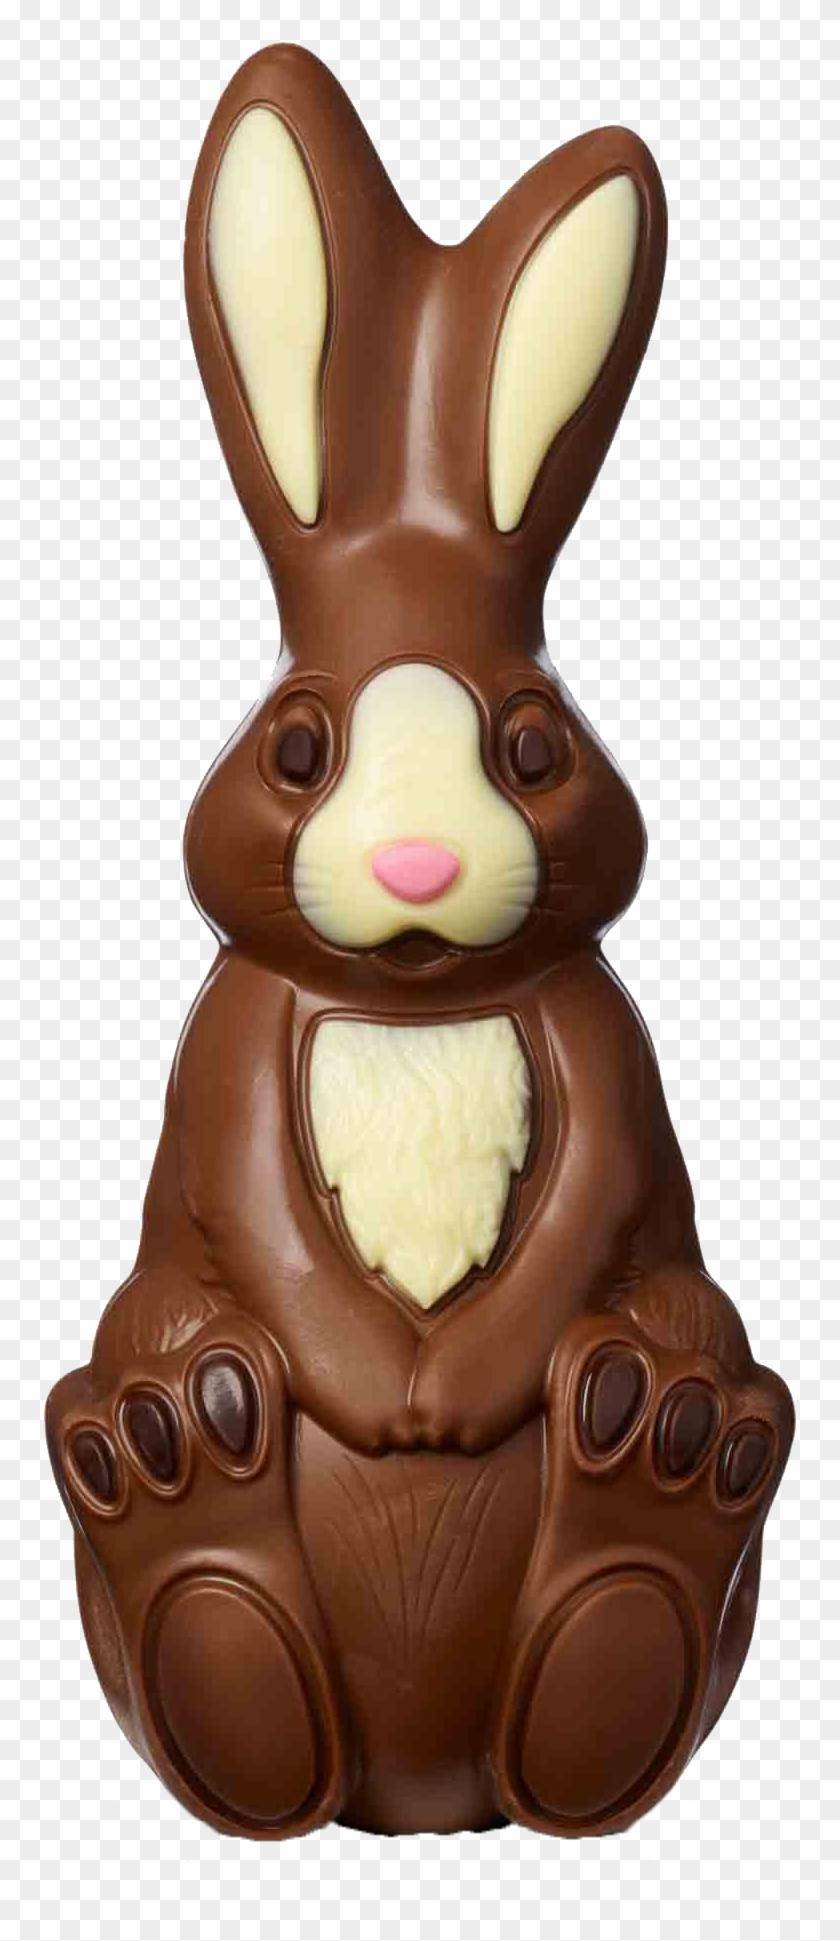 Chocolate Bunny Png - Chocolate Bunny Clipart #5899499